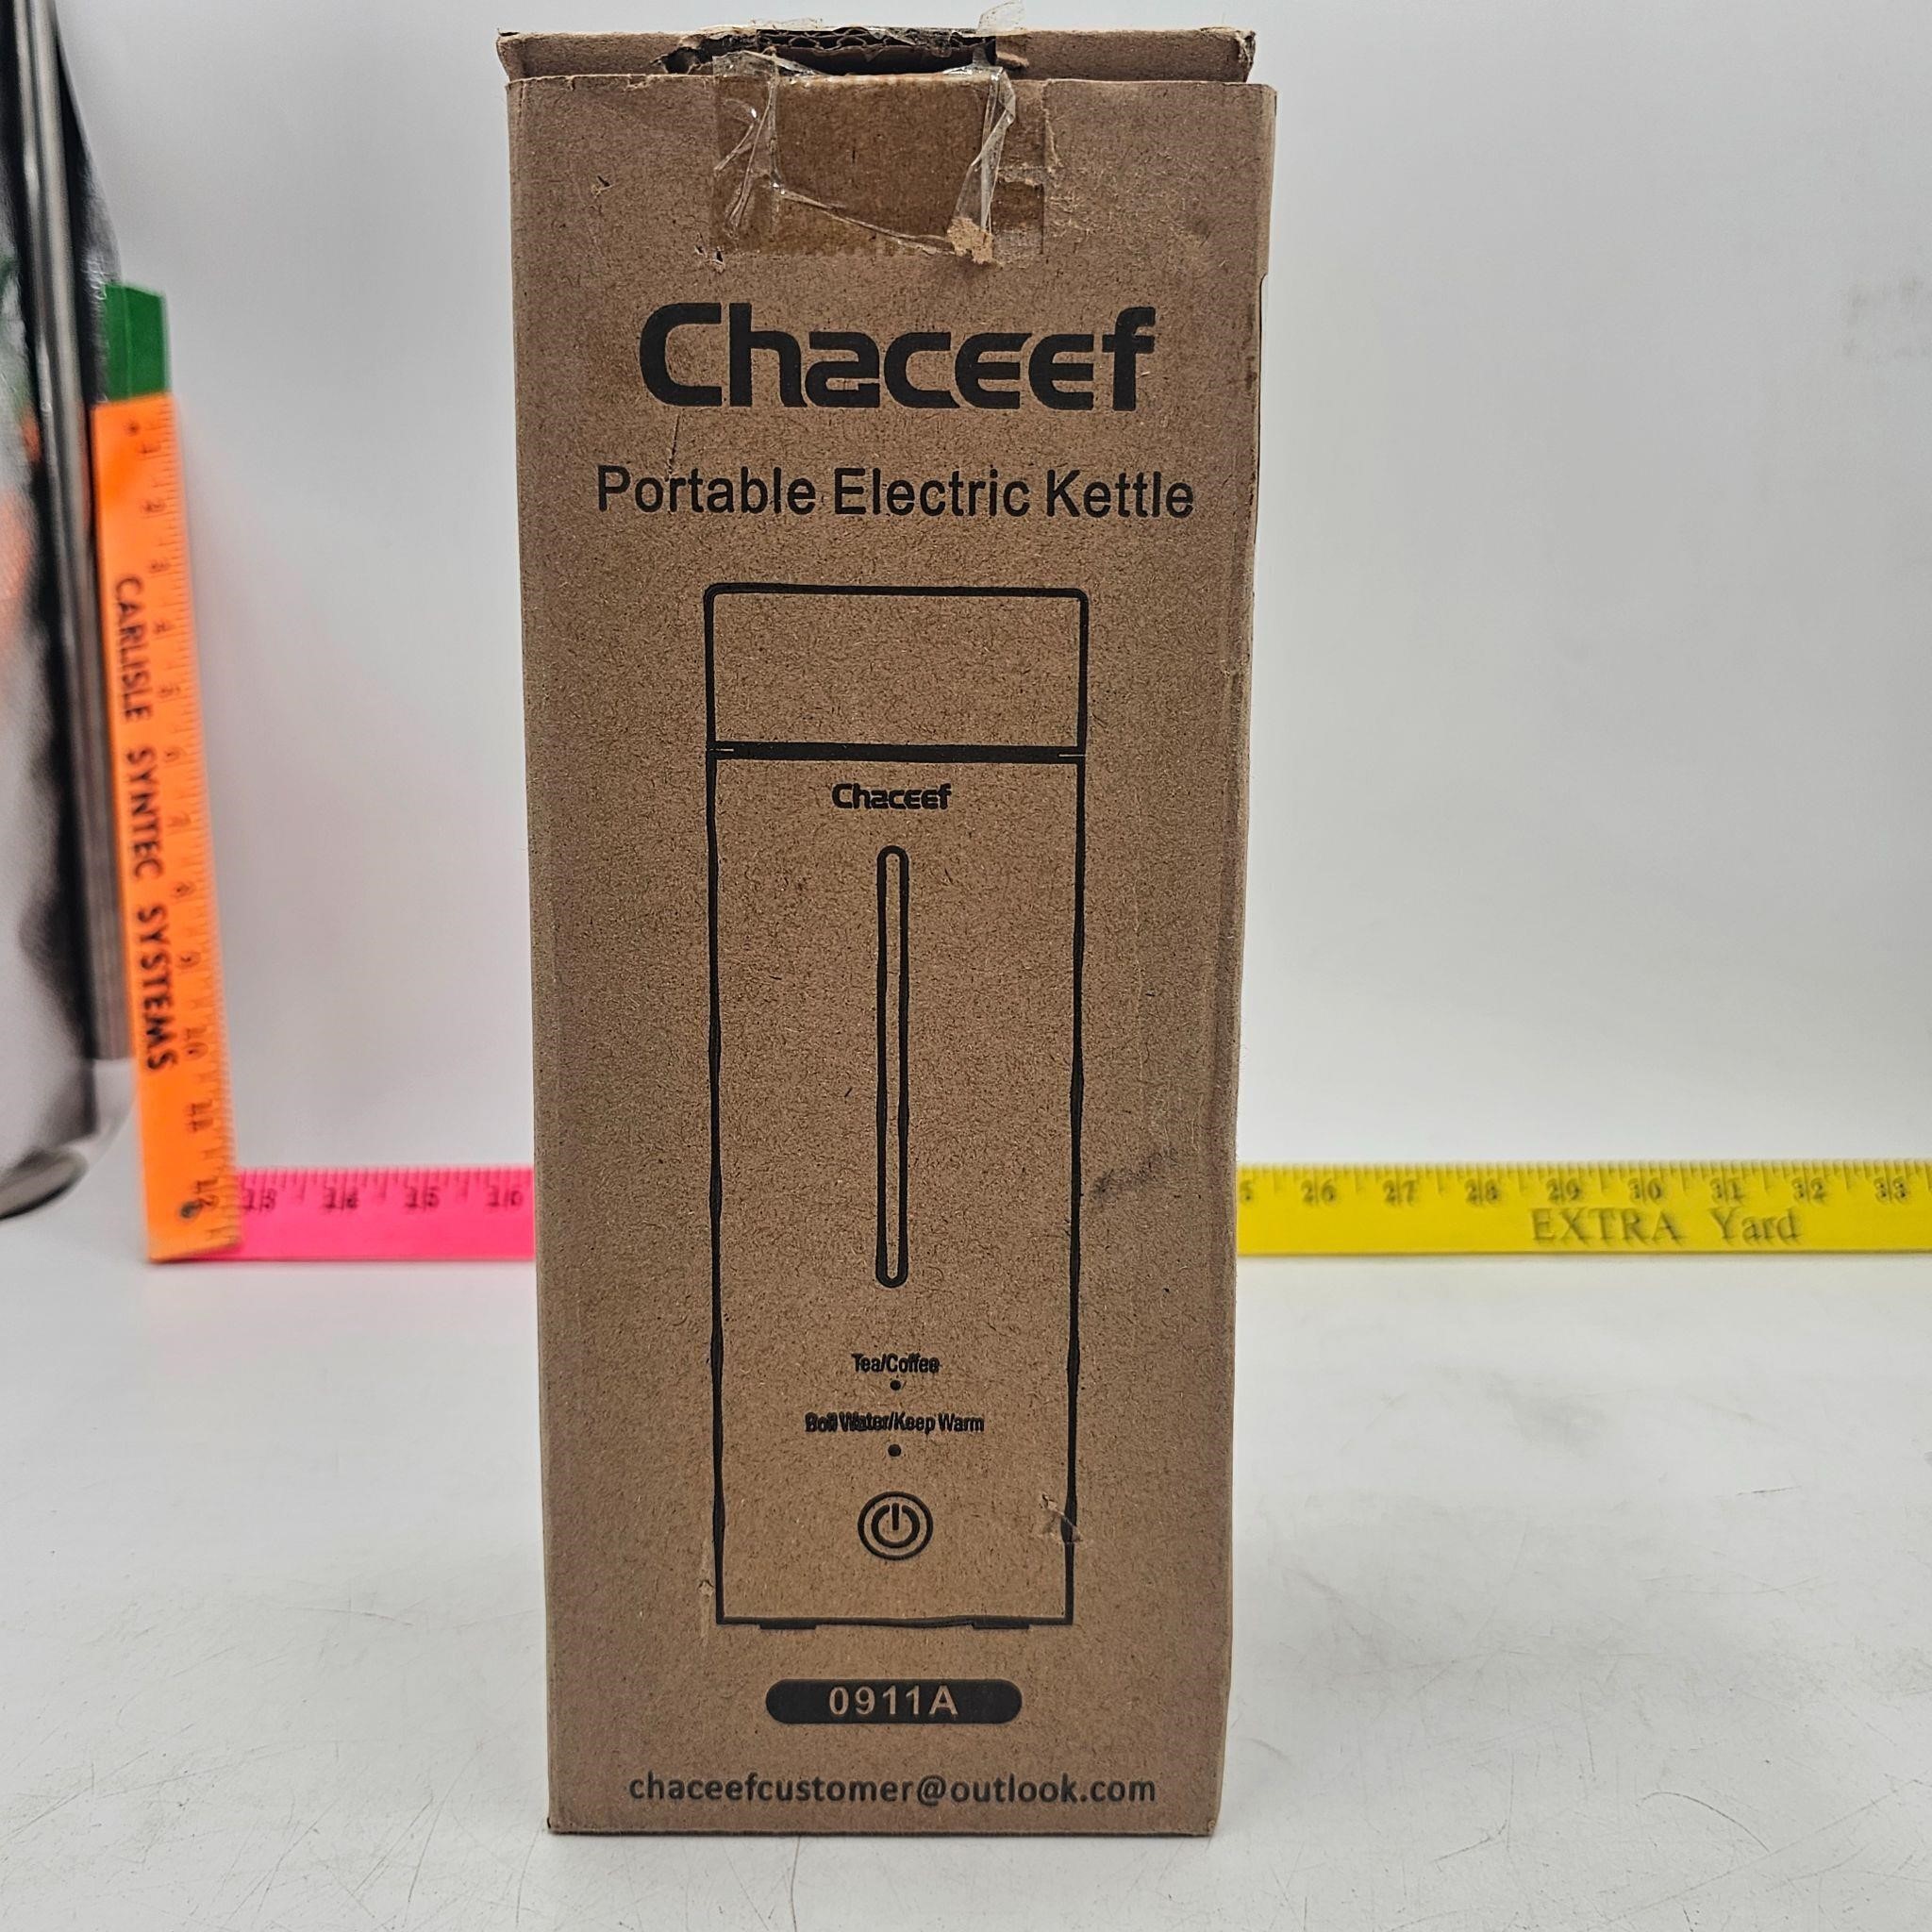 Chaceef Portable Electric Kettle